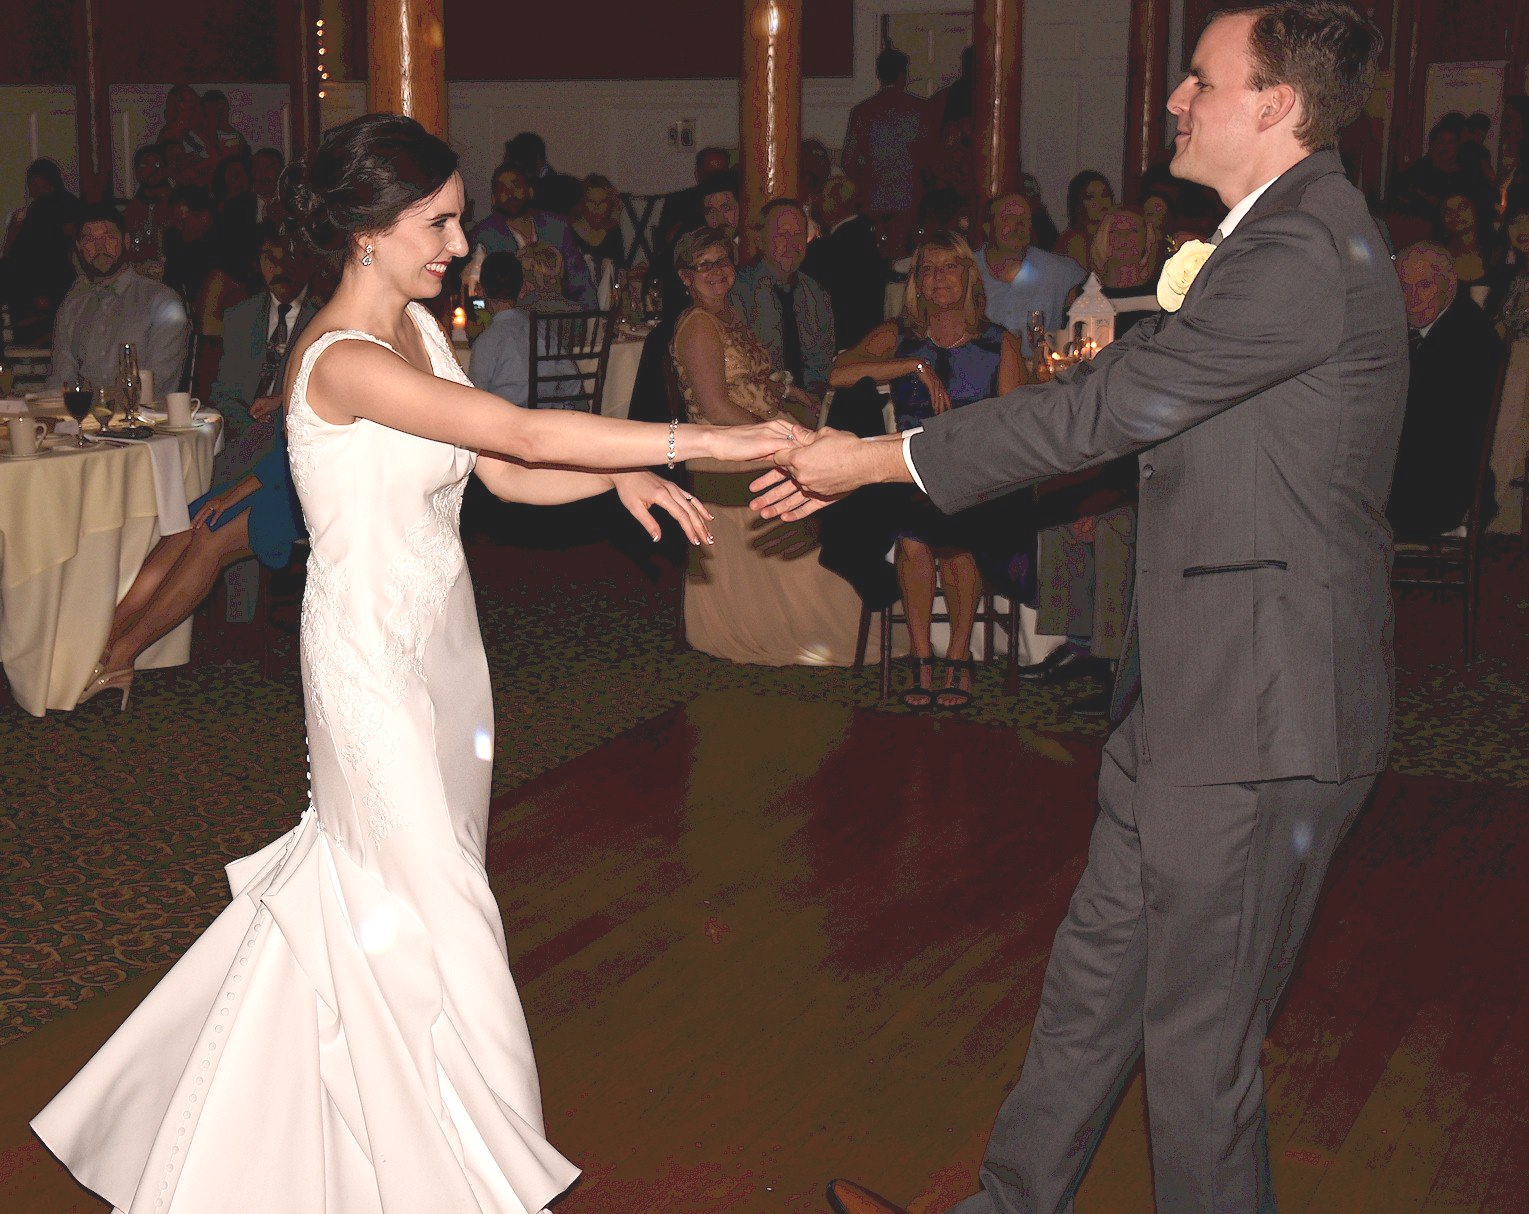 NH wedding DJ first dance at Fratellos Italian Grille, Manchester, New Hampshire